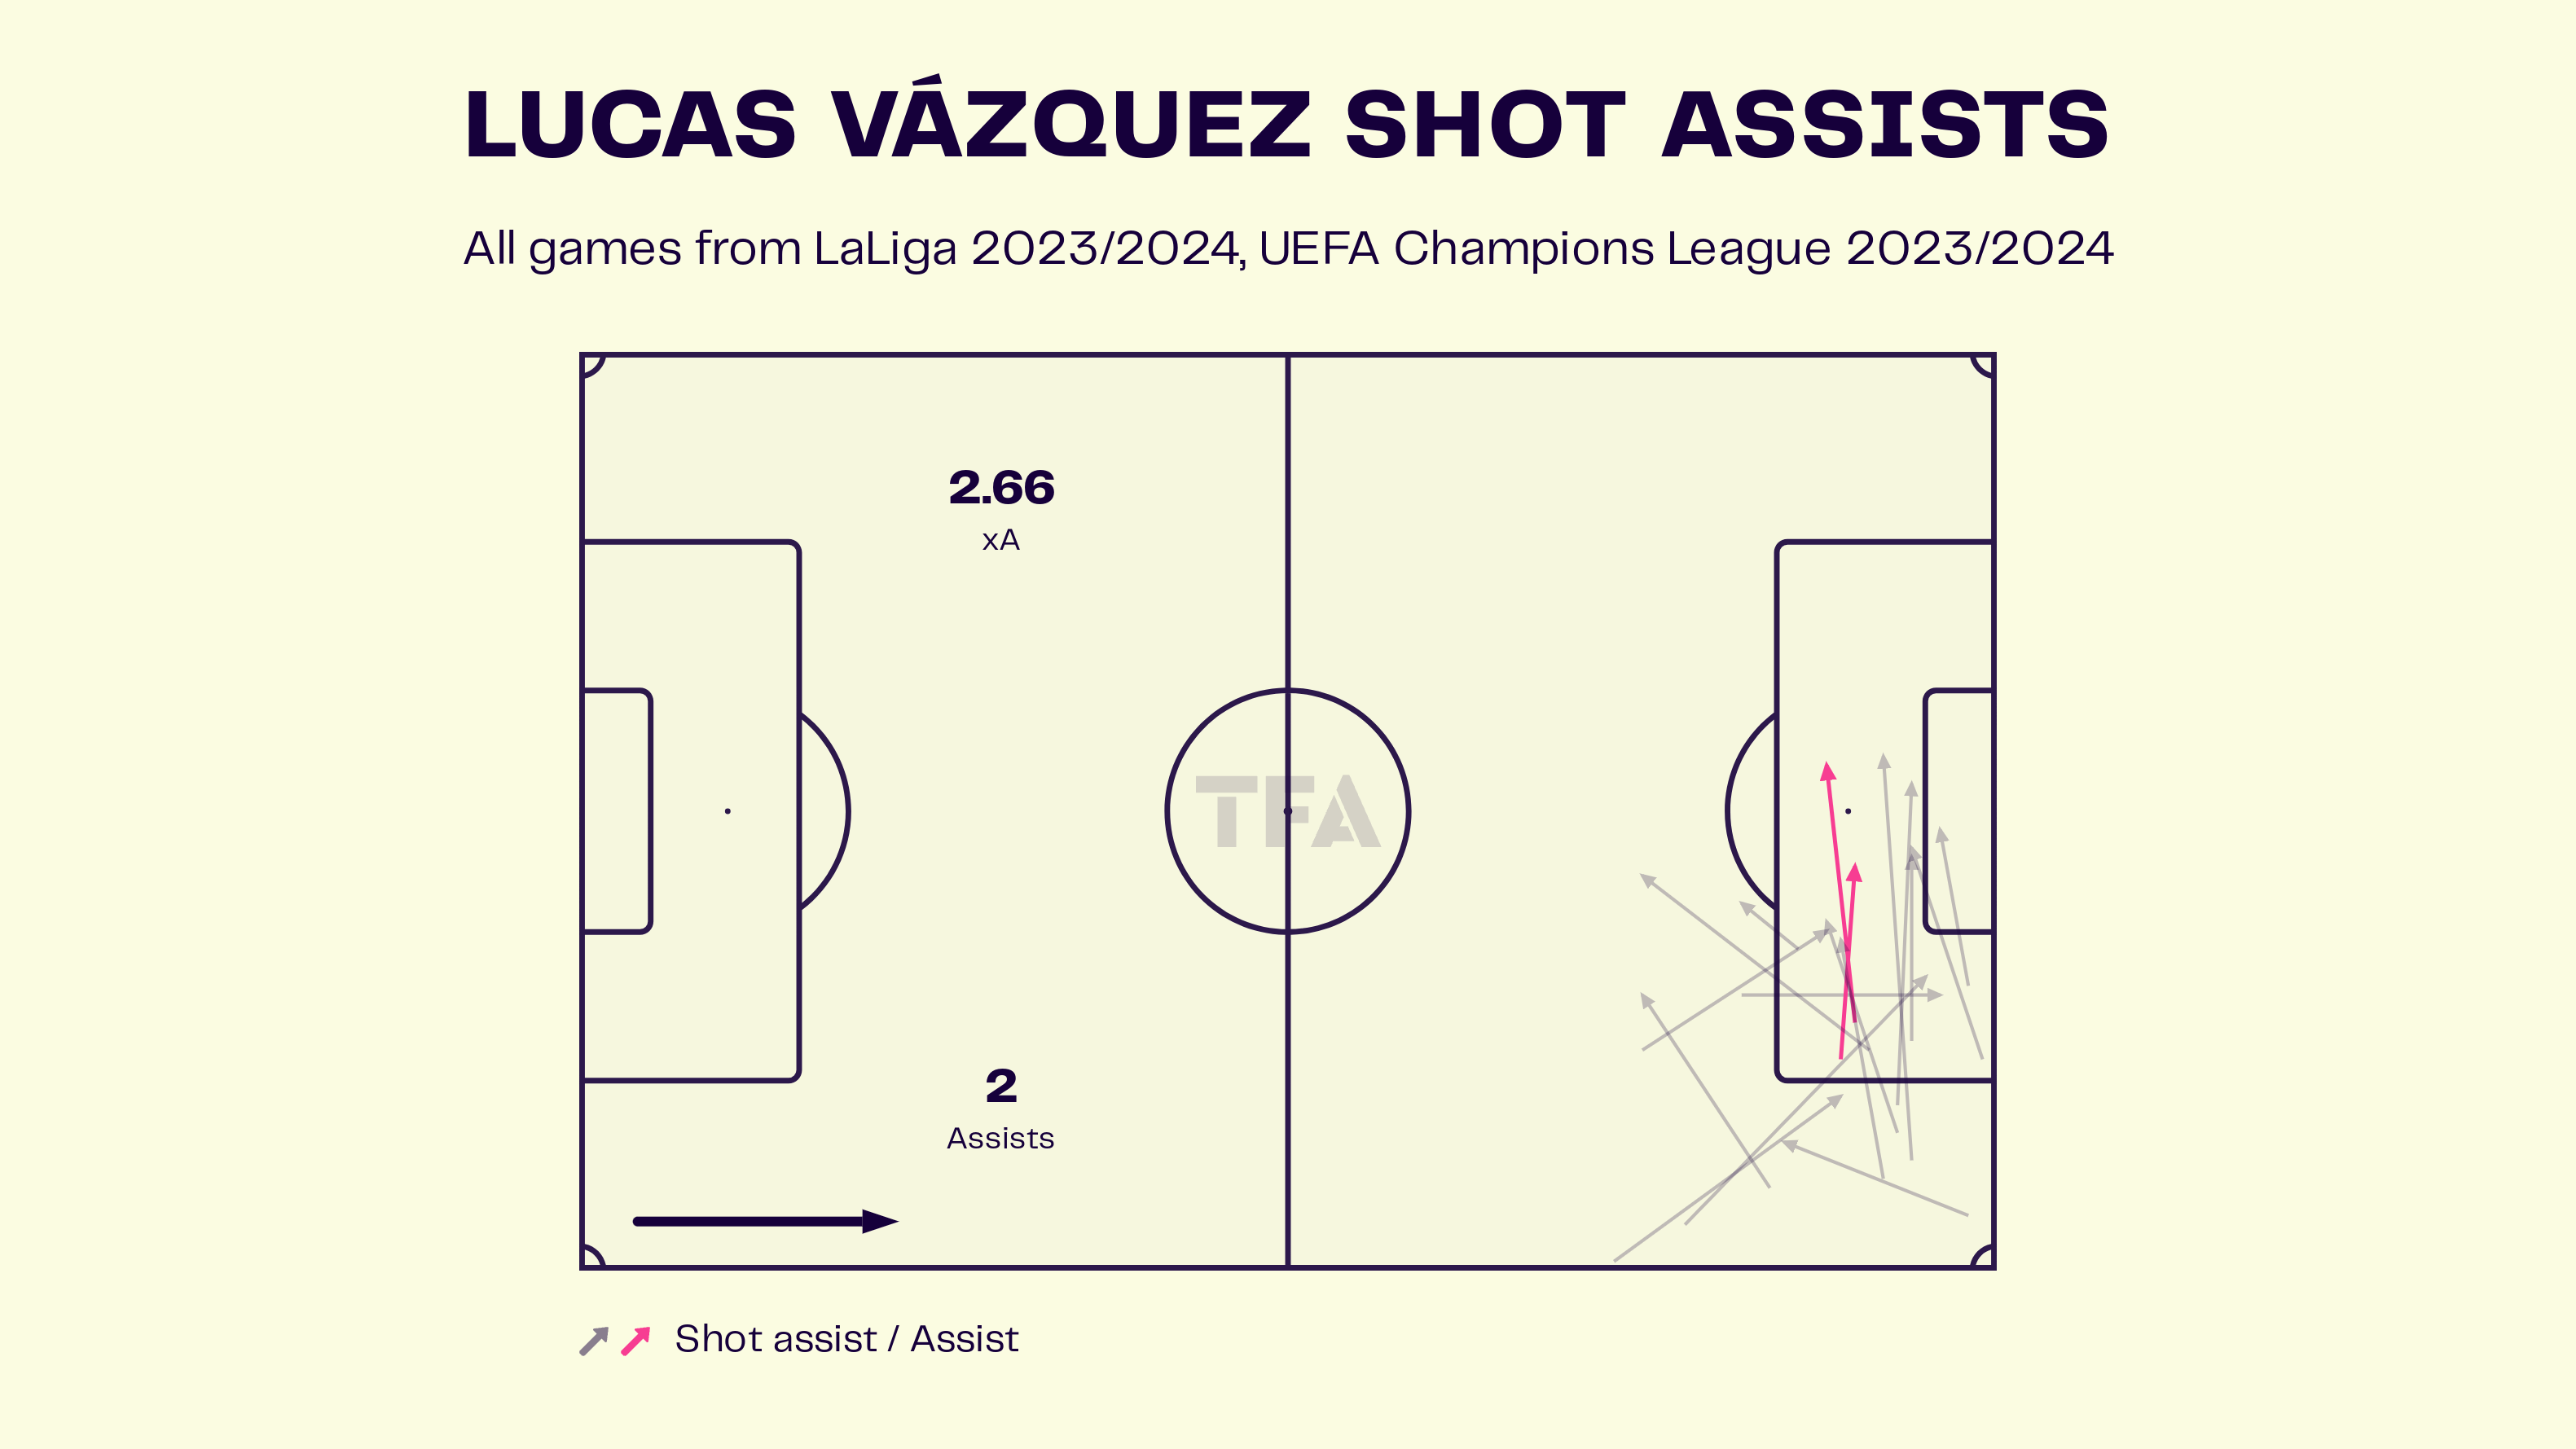 Real Madrid’s unsung hero: Lucas Vazquez delivering performances for injury-hit team